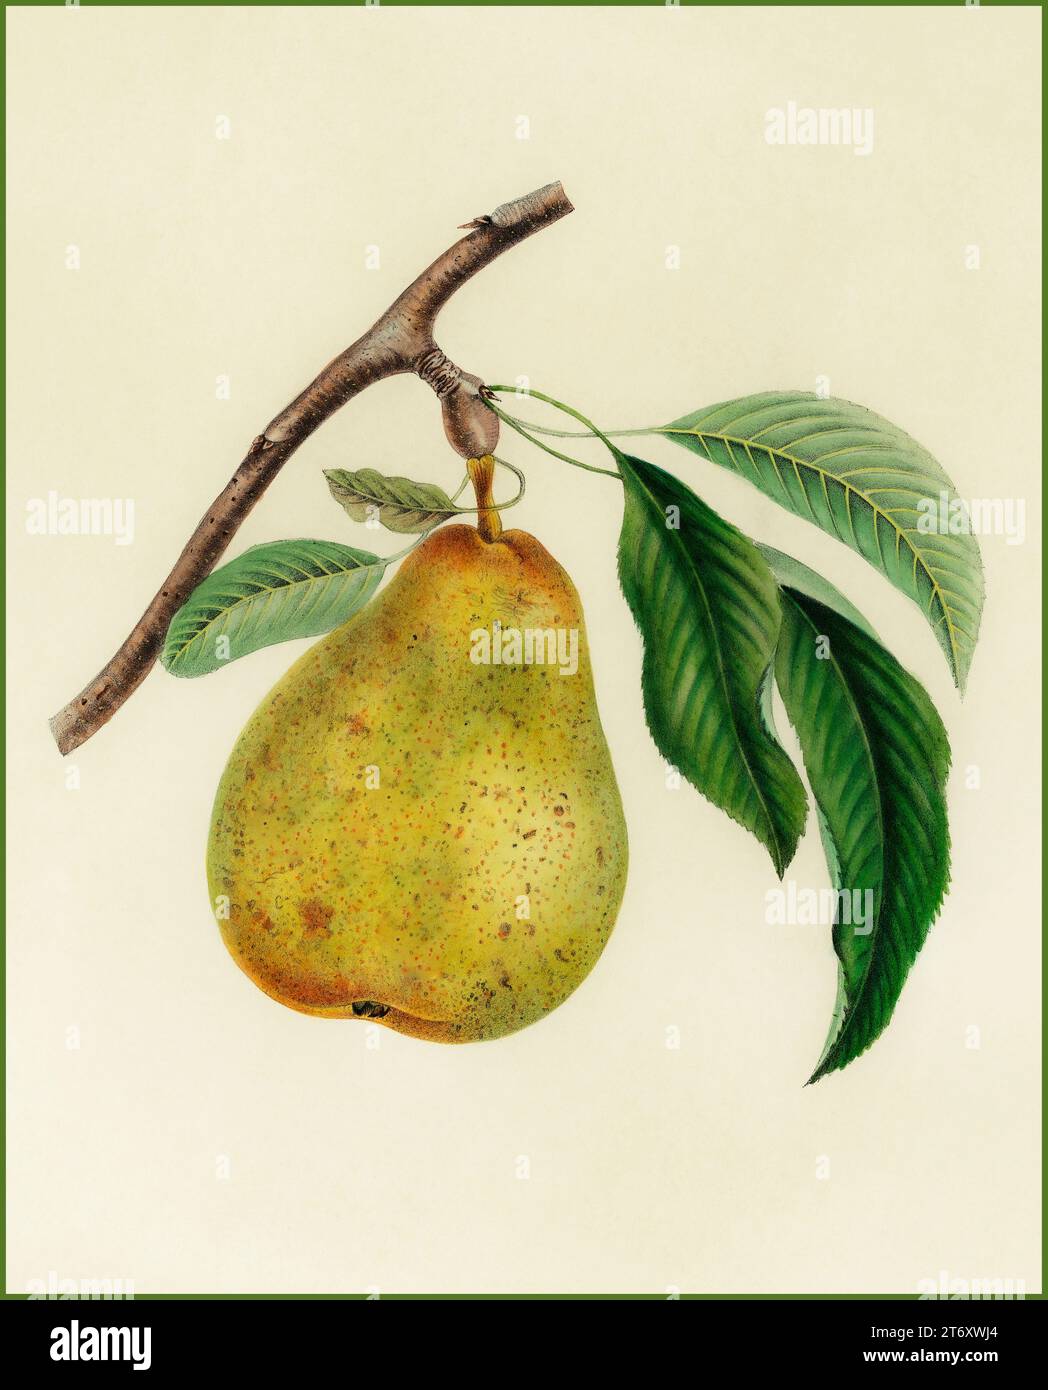 PEAR Pyrus communis Conference/Comice Pear, vintage 1900s illustration lithograph cutout of a pear on white background Stock Photo